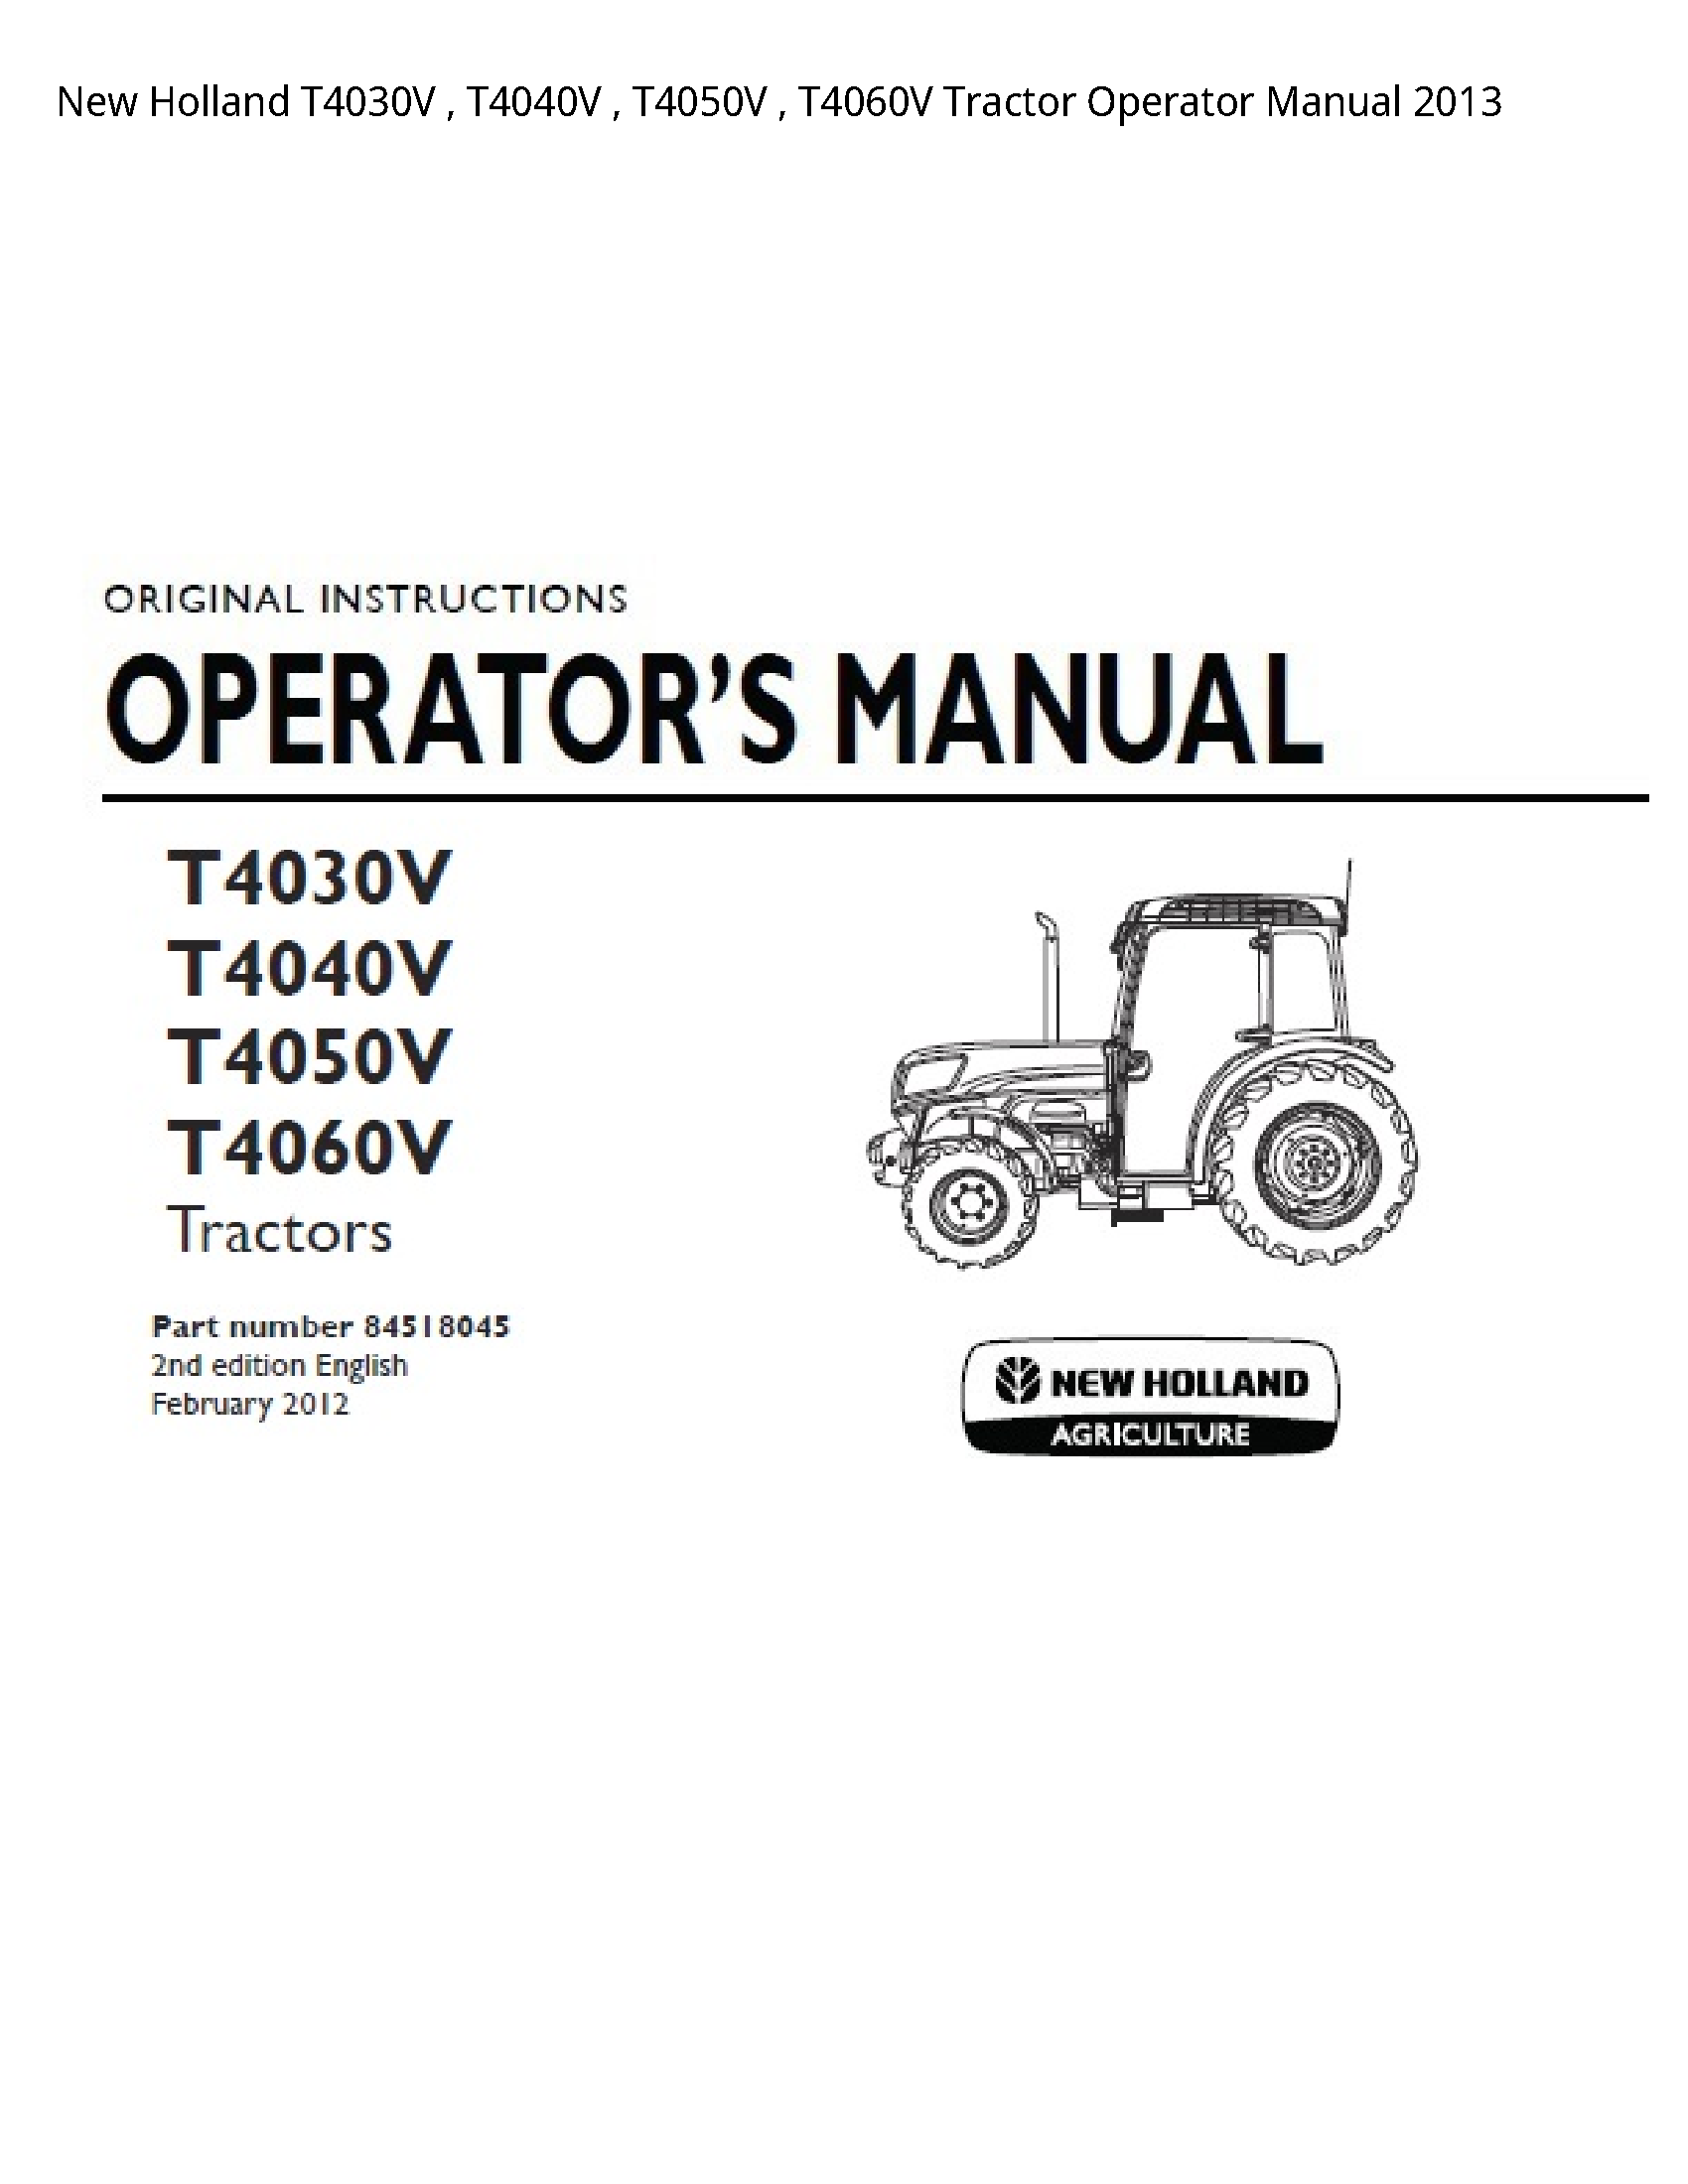 New Holland T4030V Tractor Operator manual